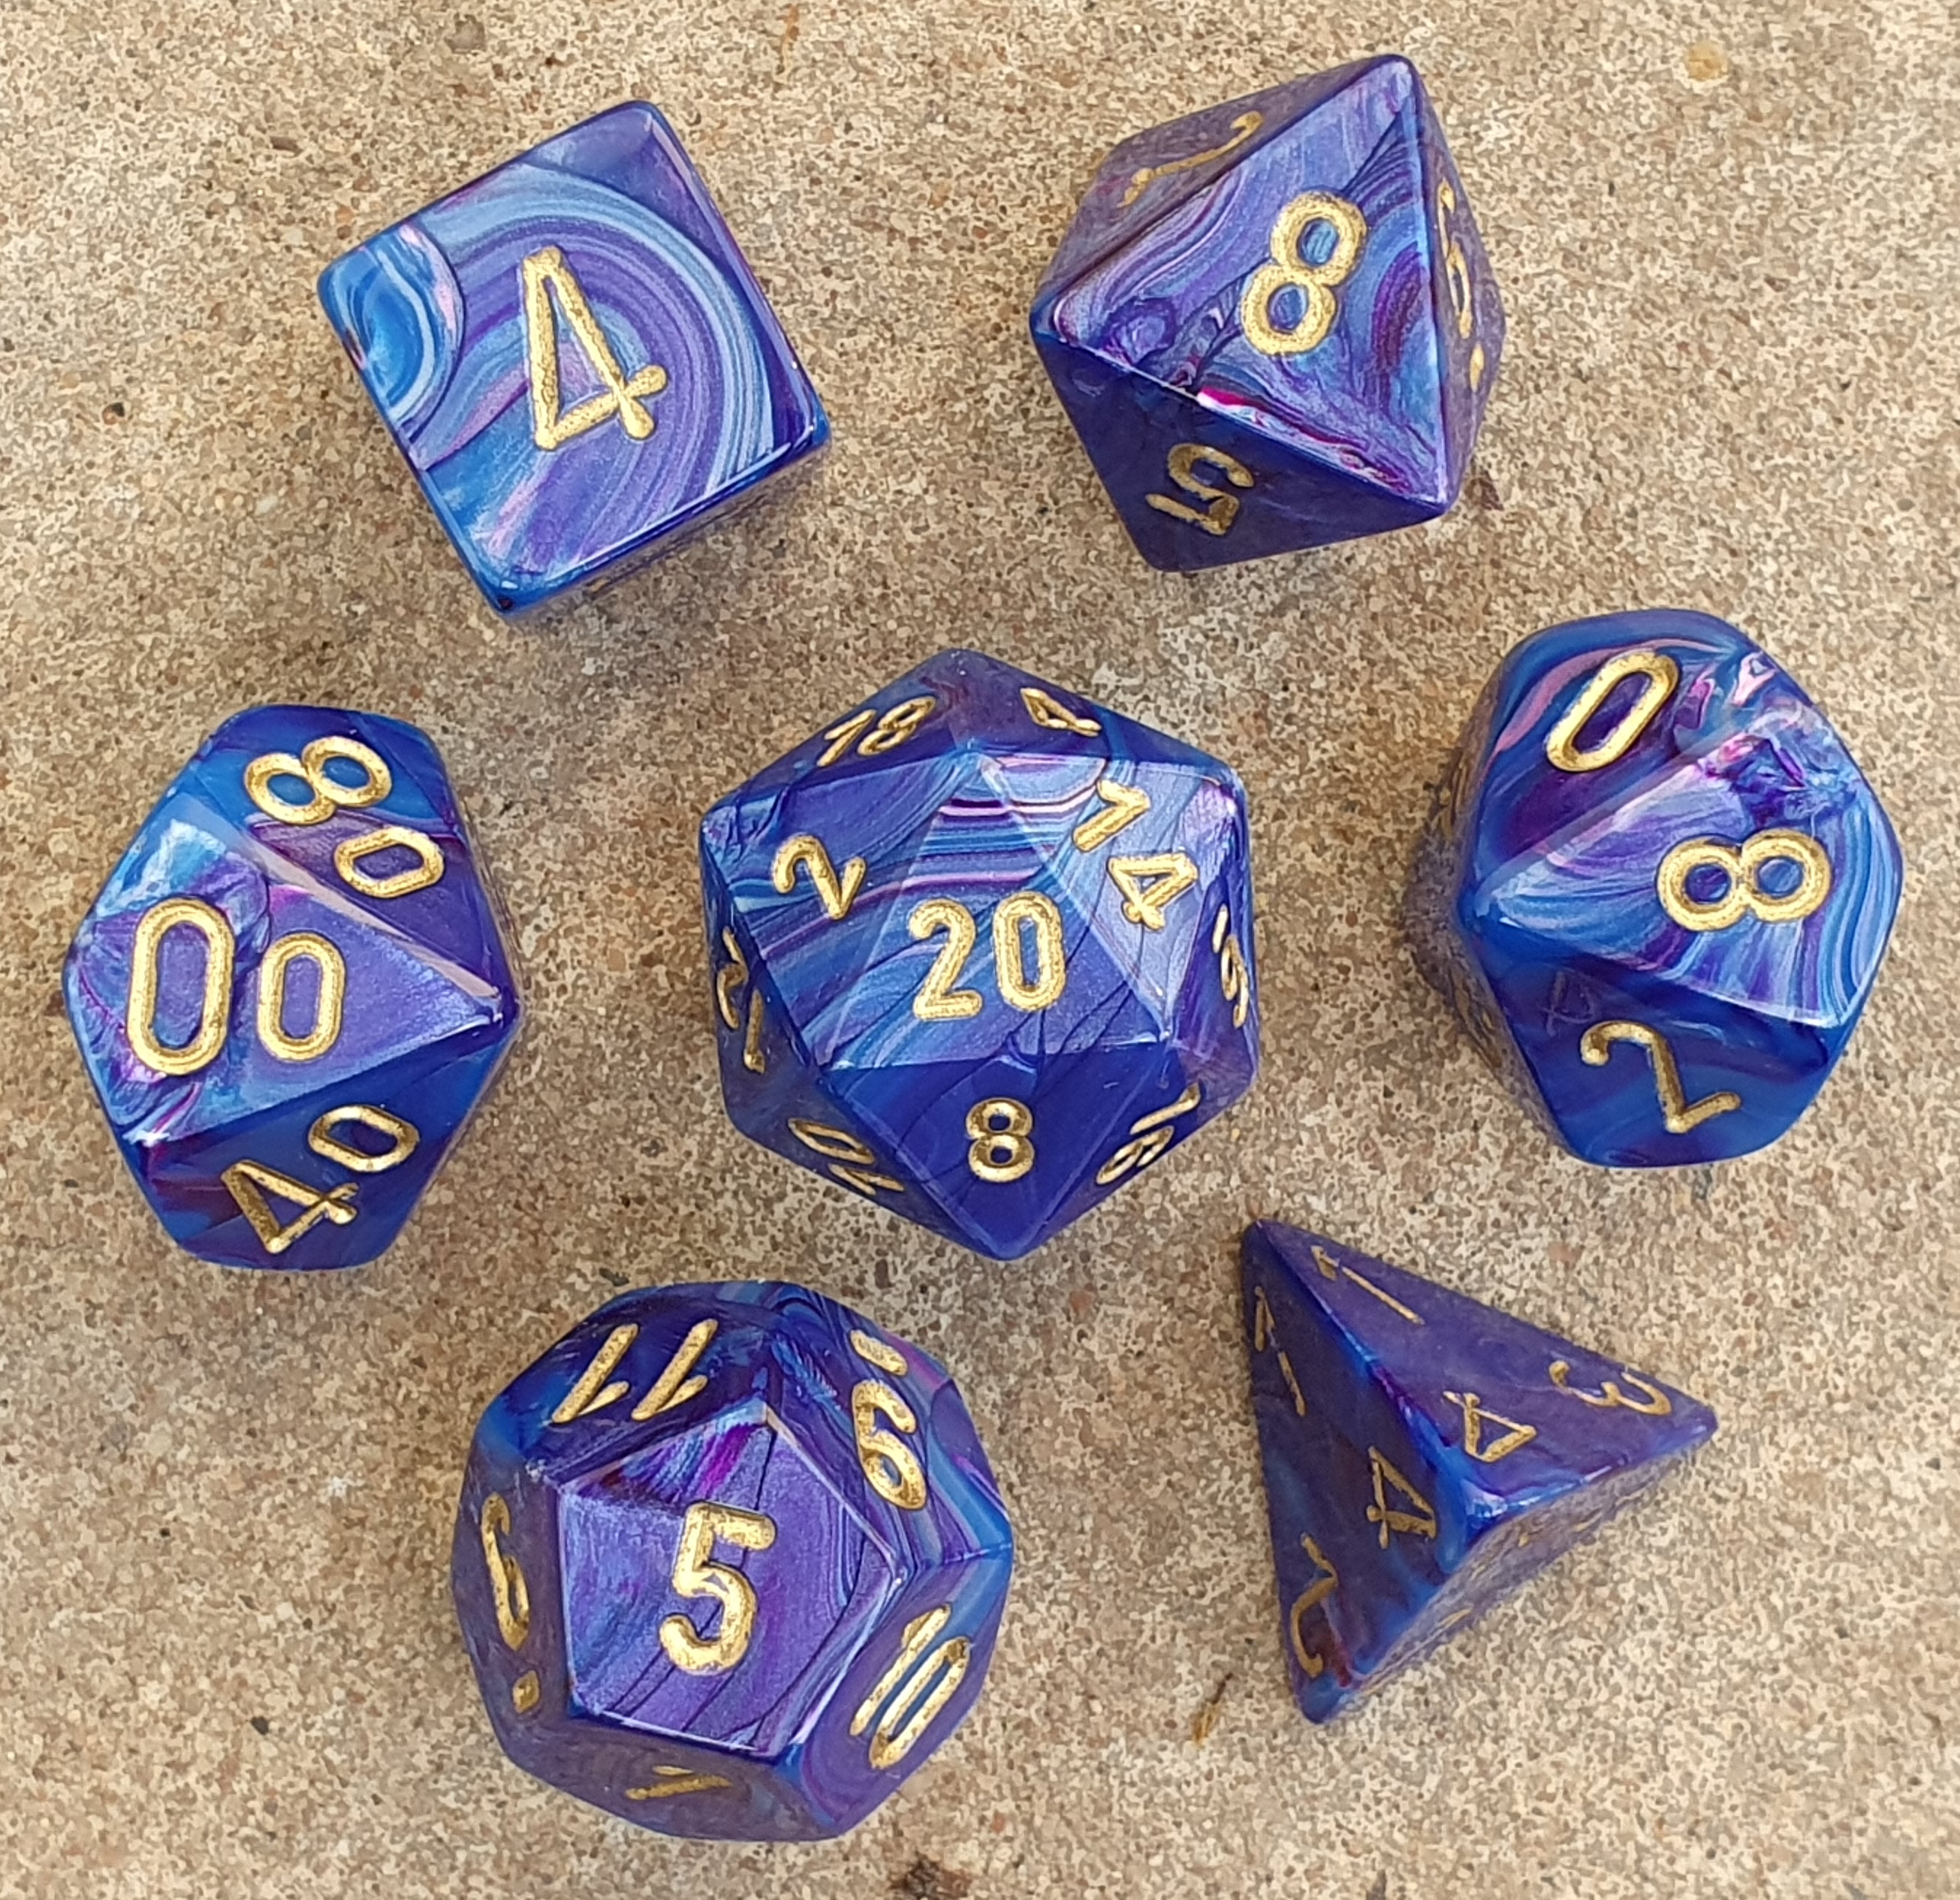 Chessex Polyhedral 7 Die Lustrous Shadow with Gold Pips Dice 7 Set CHX 27499 